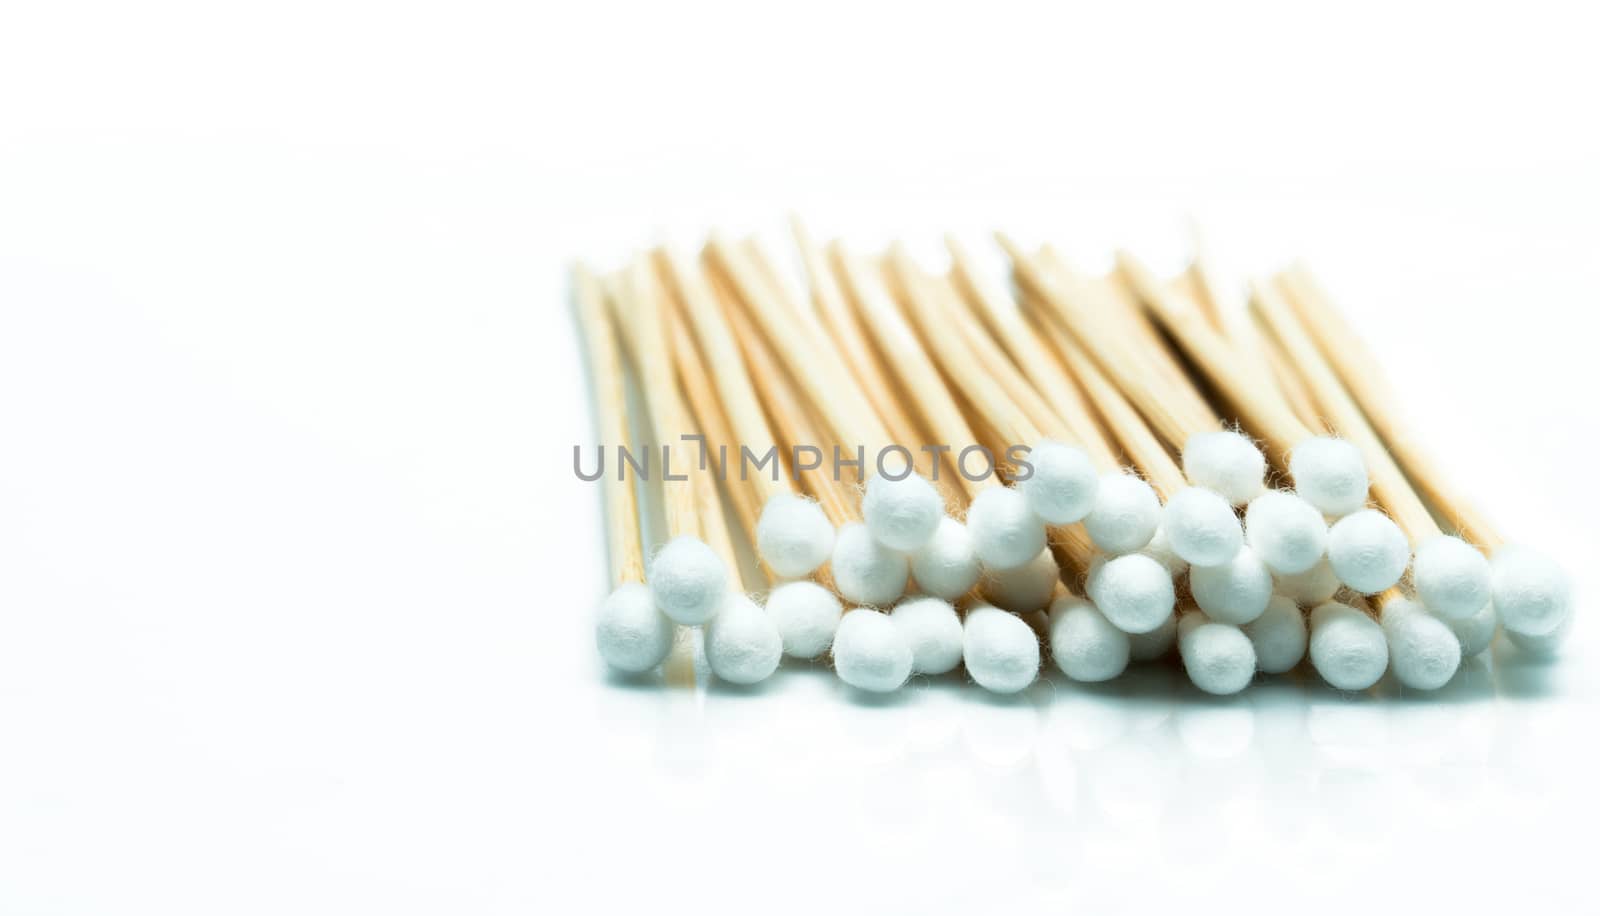 Cotton sticks isolated on white background with copy space for text. Wound care supply. Medical equipment. by Fahroni